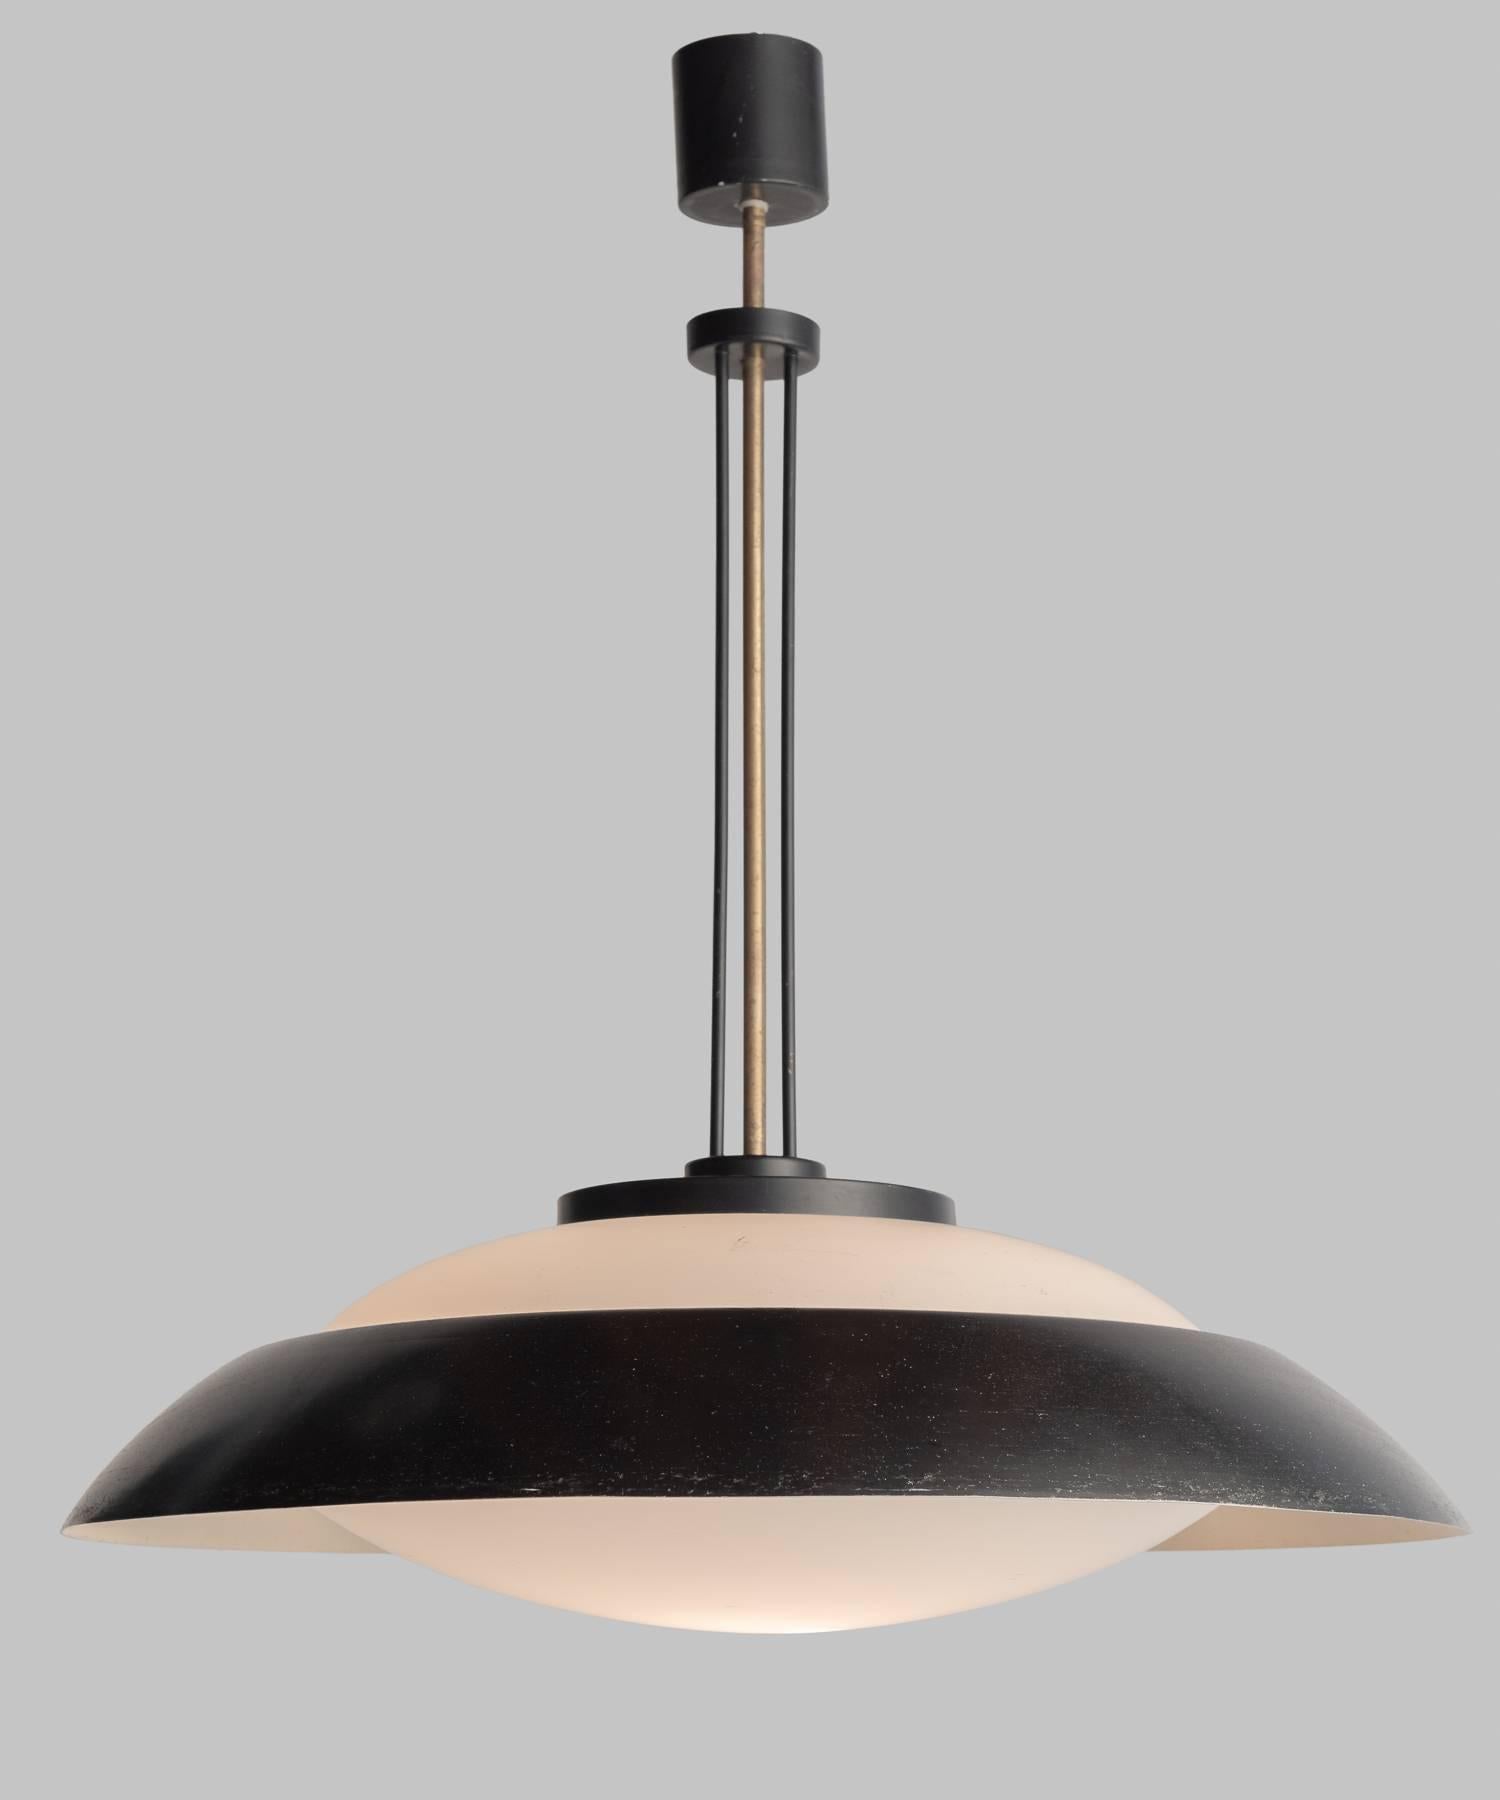 Black Enamel and Opaline Glass Ceiling Light, Italy, circa 1960

Elegant shade features a metal visor in a wonderful patina. 

Measure: 22